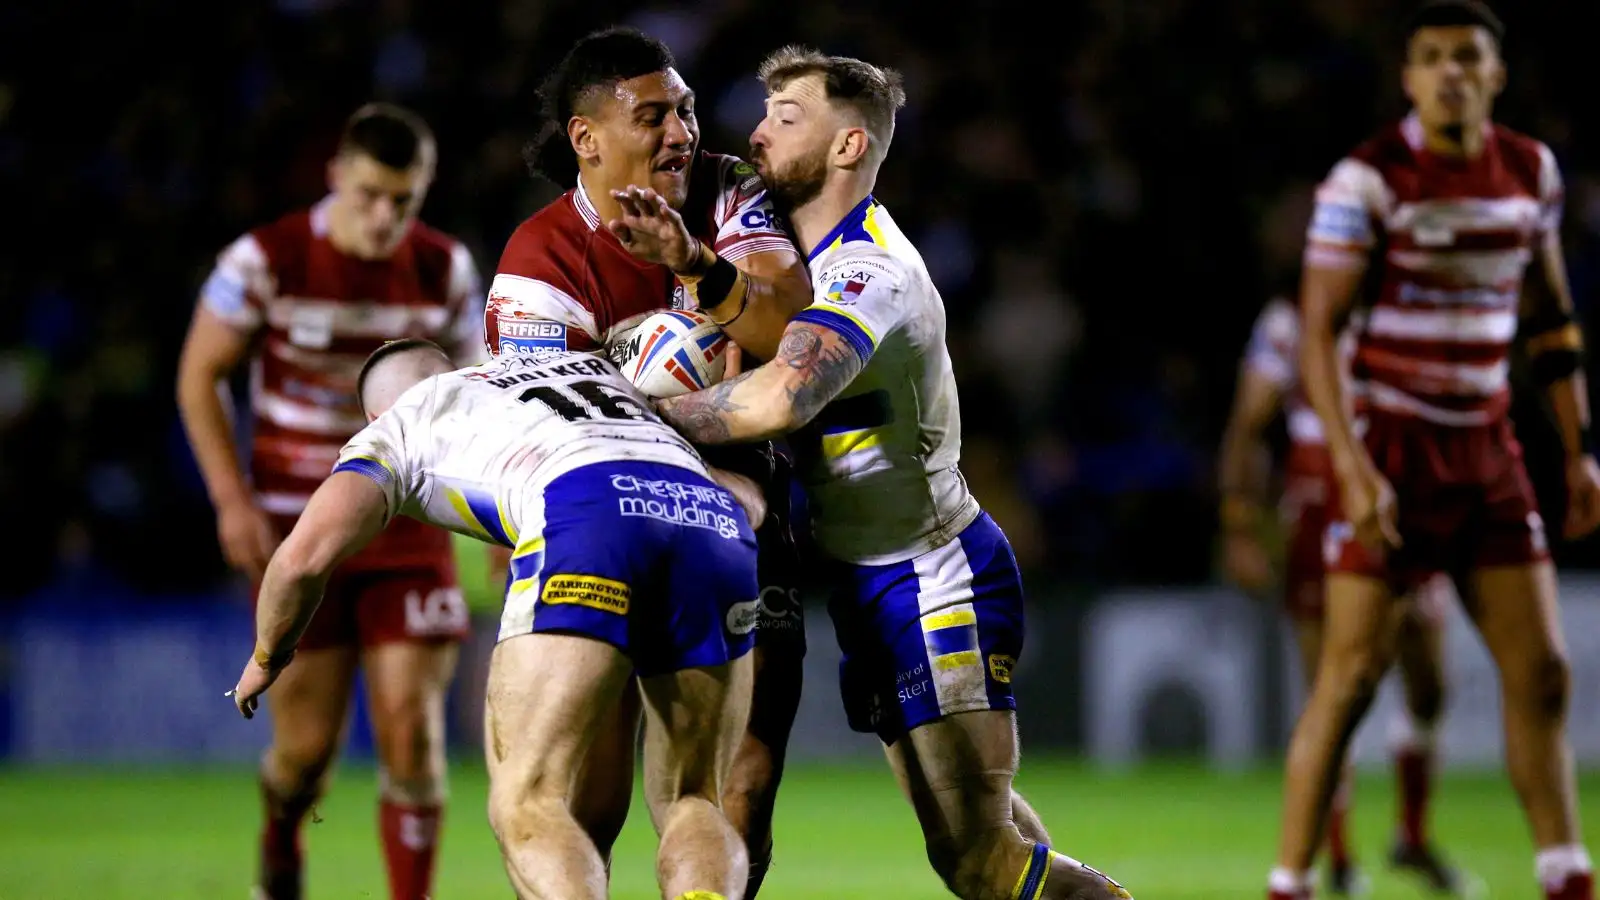 Warrington hoping to have players back soon as Daryl Clark fitness explained 